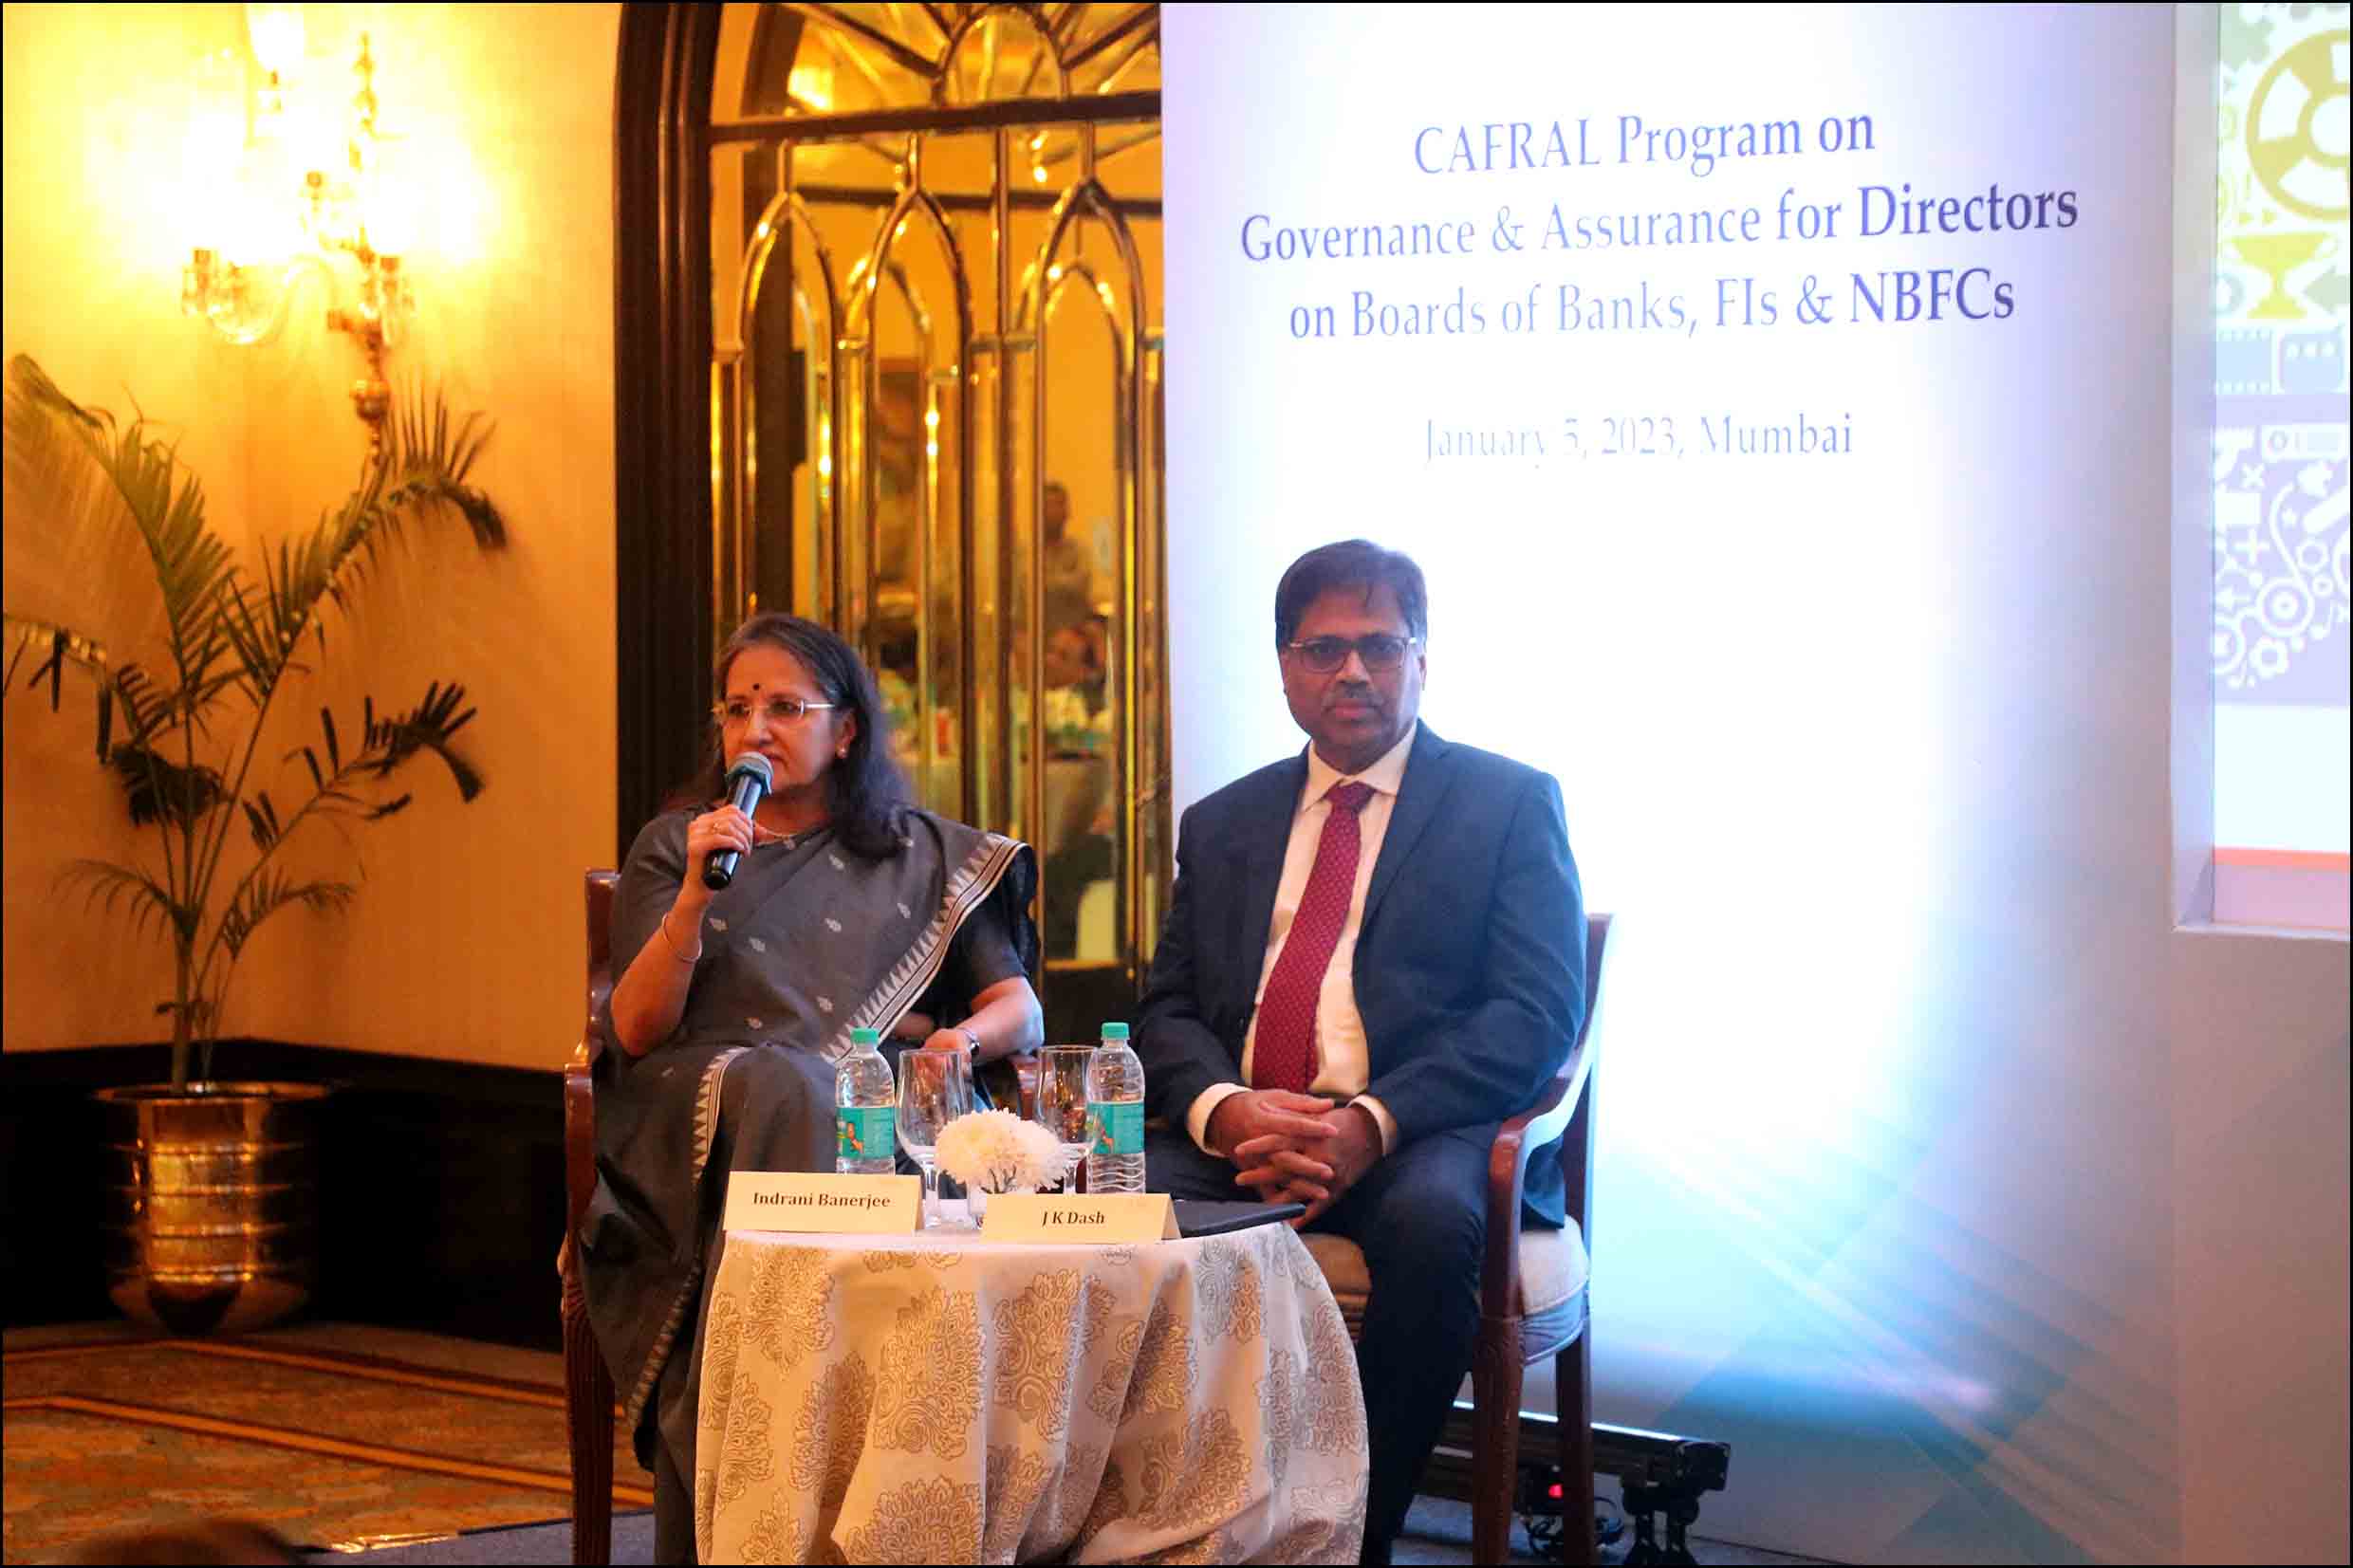 Photos at CAFRAL Program on Governance and Assurance for Directors on Boards of Banks, FIs and NBFCs